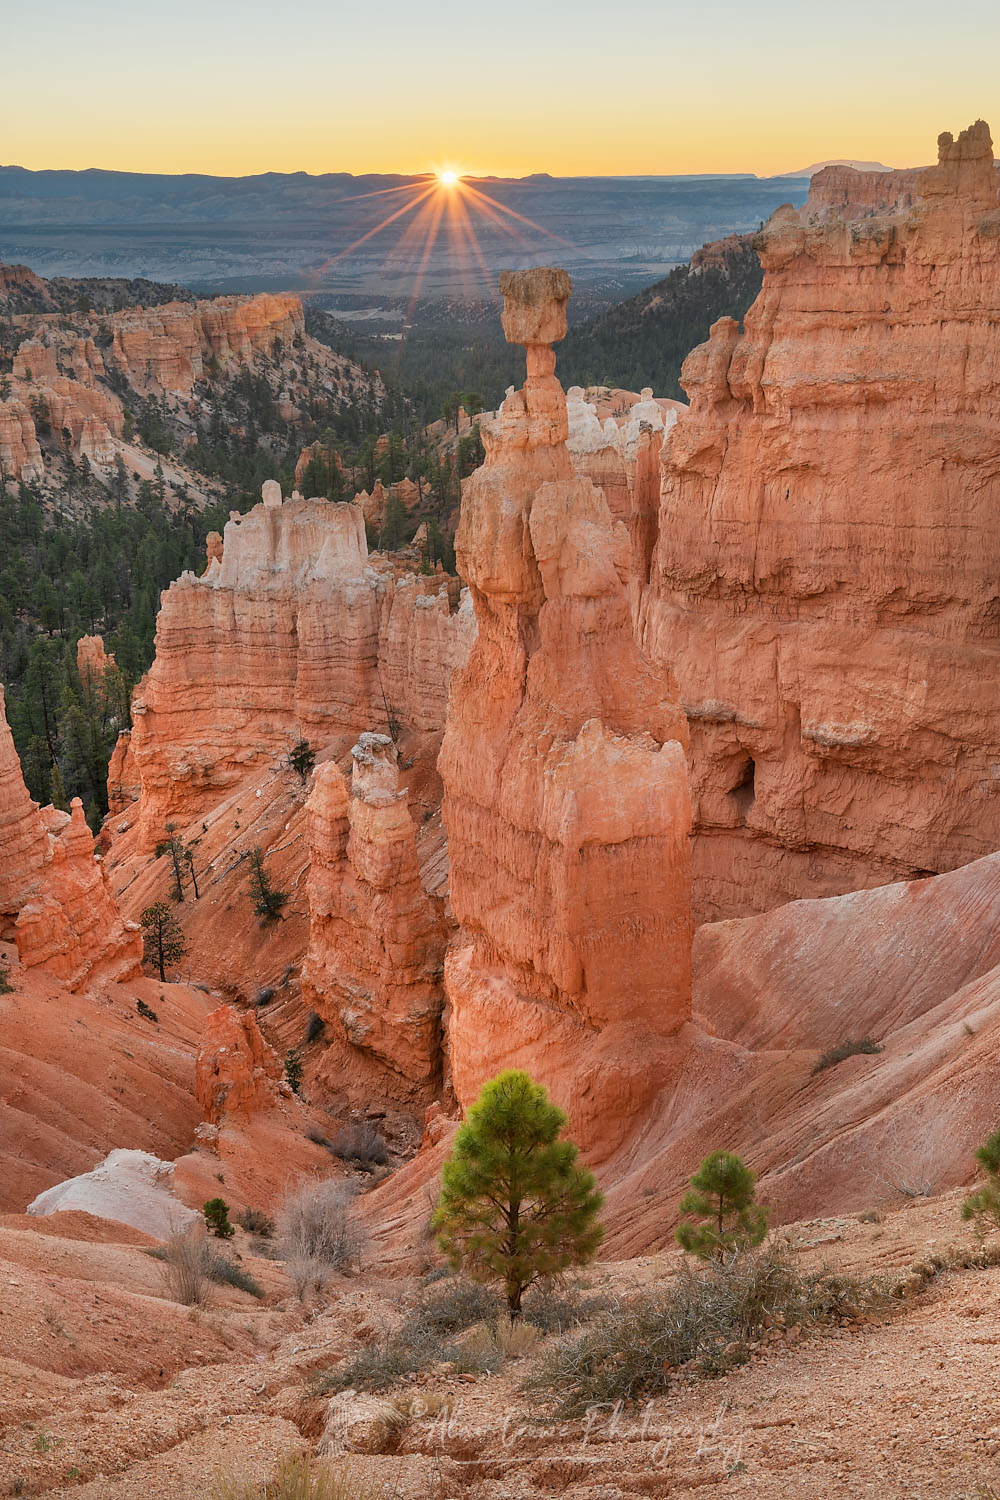 Sunrise view of Thor's Hammer and colorful hoodoos seen from below the canyon rim at Sunrise Point, Bryce Canyon National Park, Utah #76480